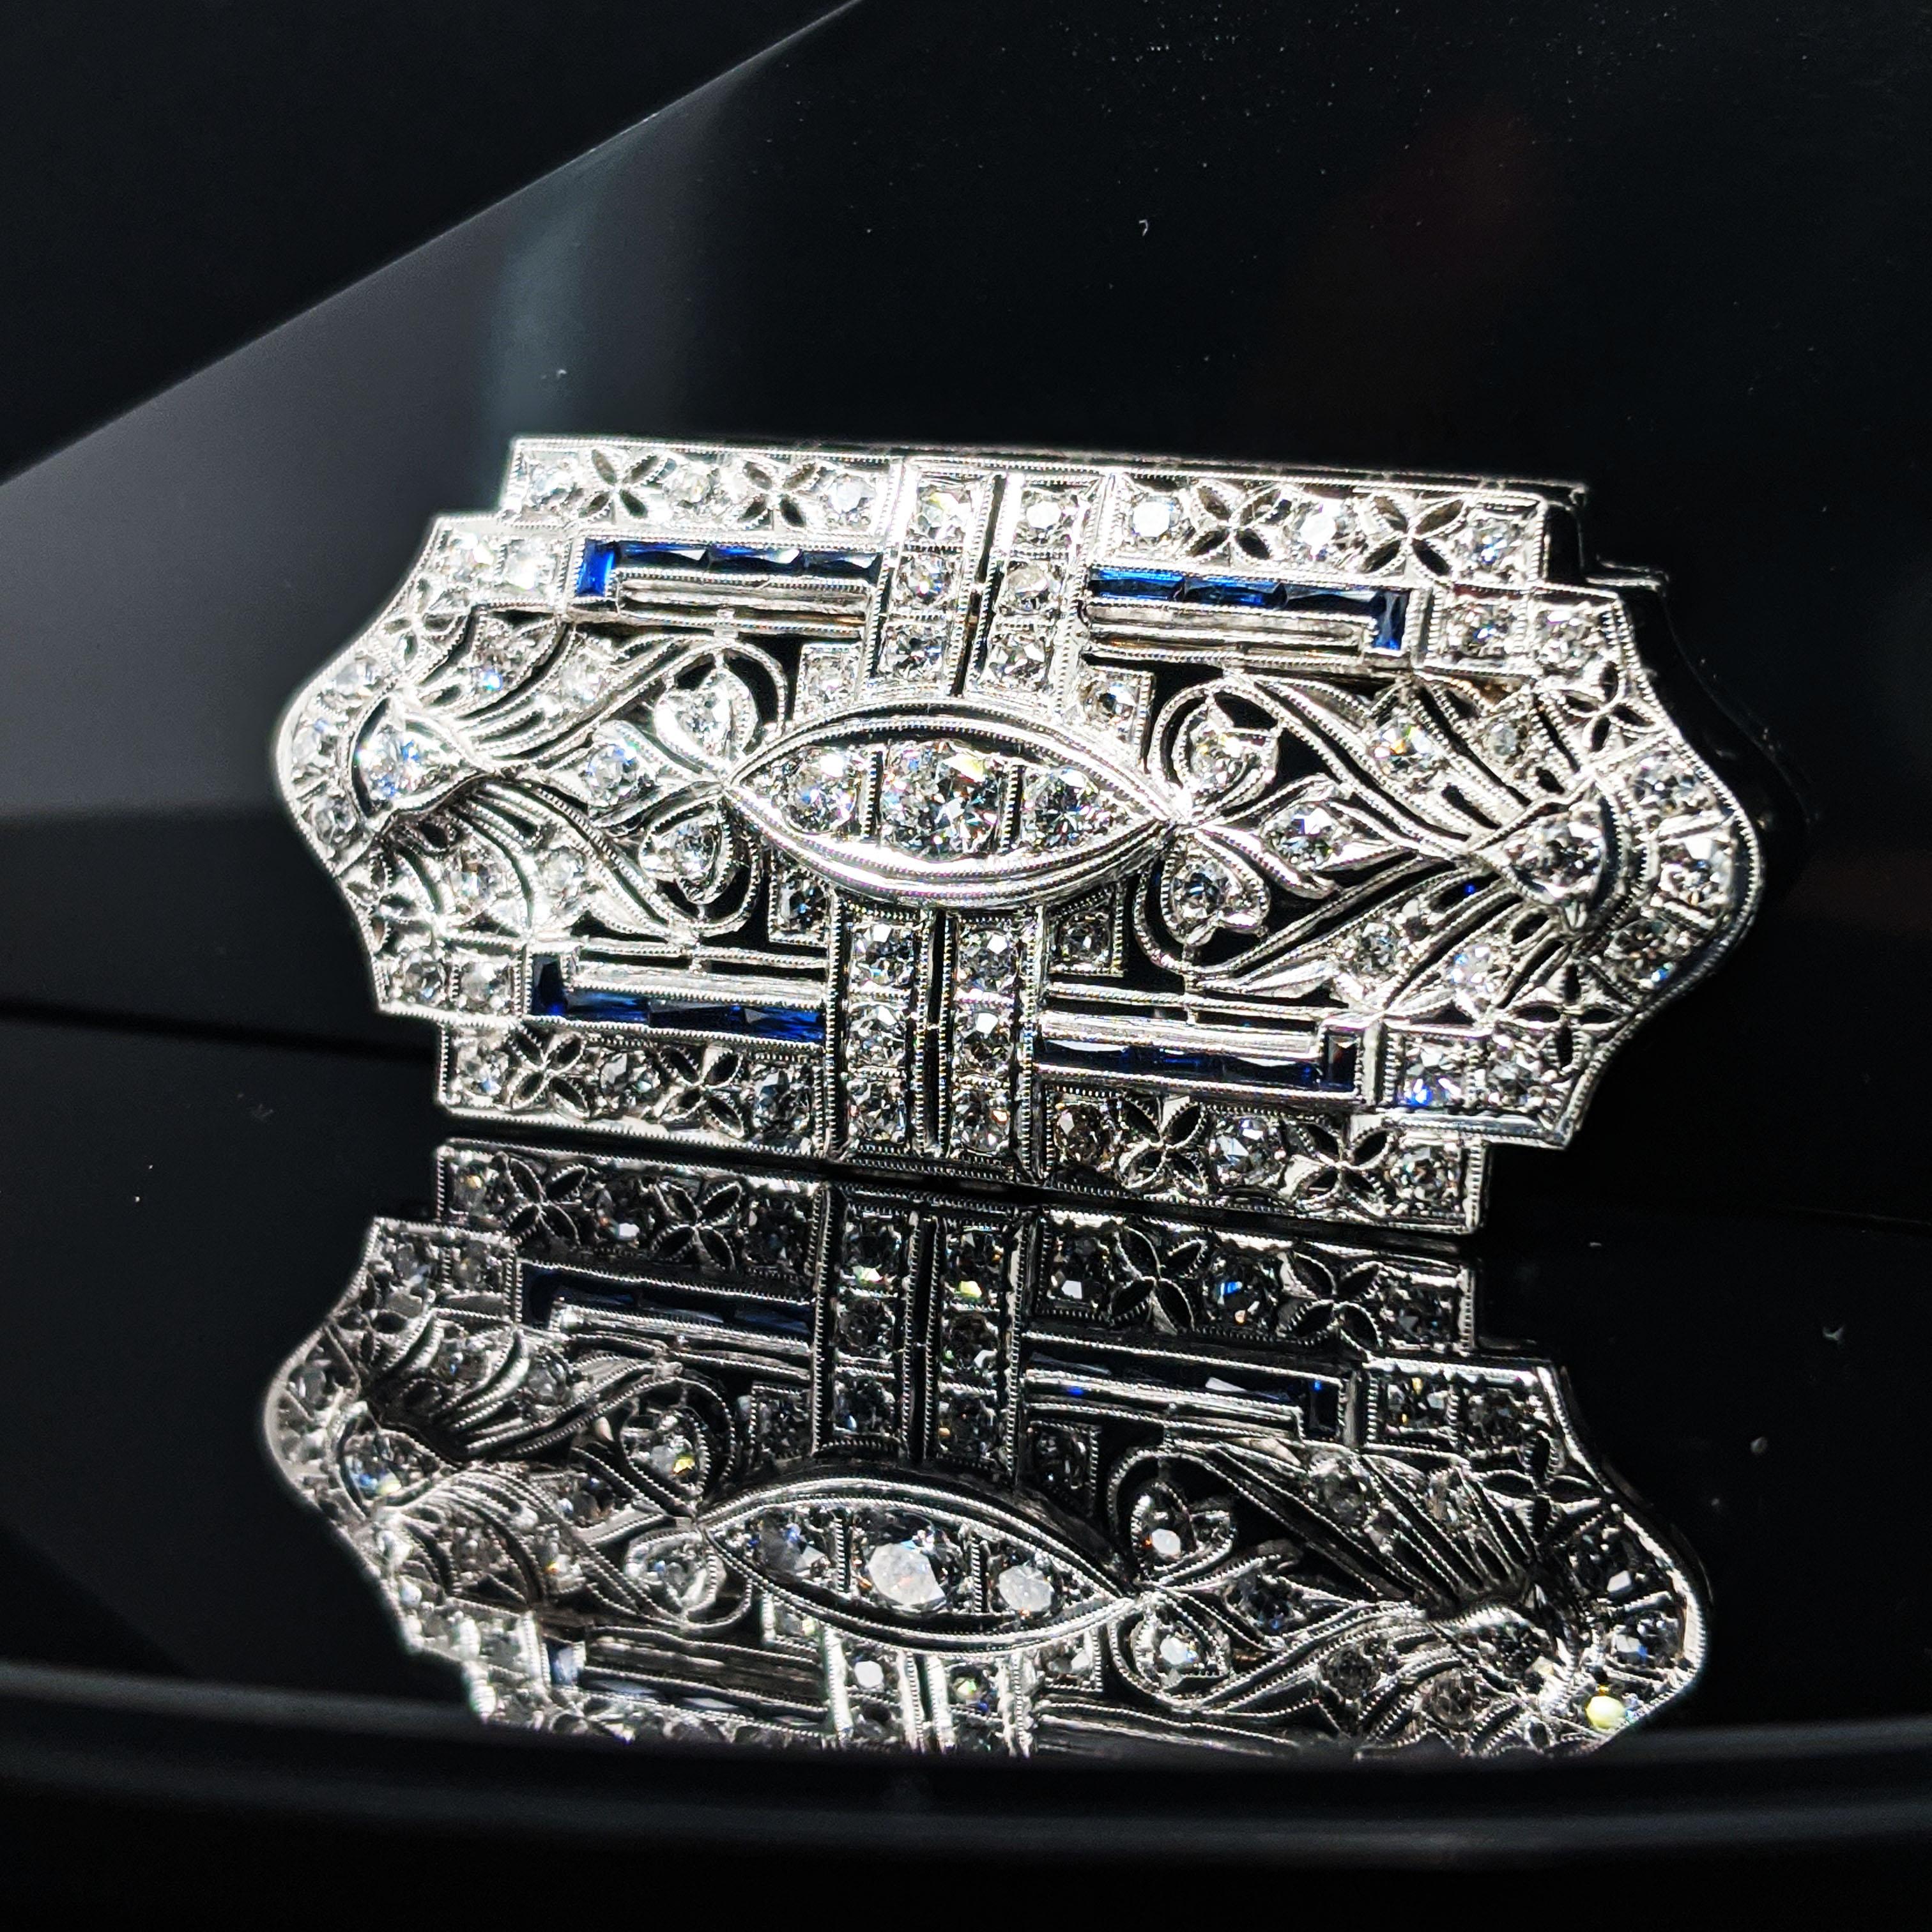 This is a stunning Art Deco pin pendant in platinum with a gorgeous array of bright white diamonds and beautiful blue sapphires. The pin pendant has an intricate pierced design that is accented with fine milgrain detailing. The negative space in the